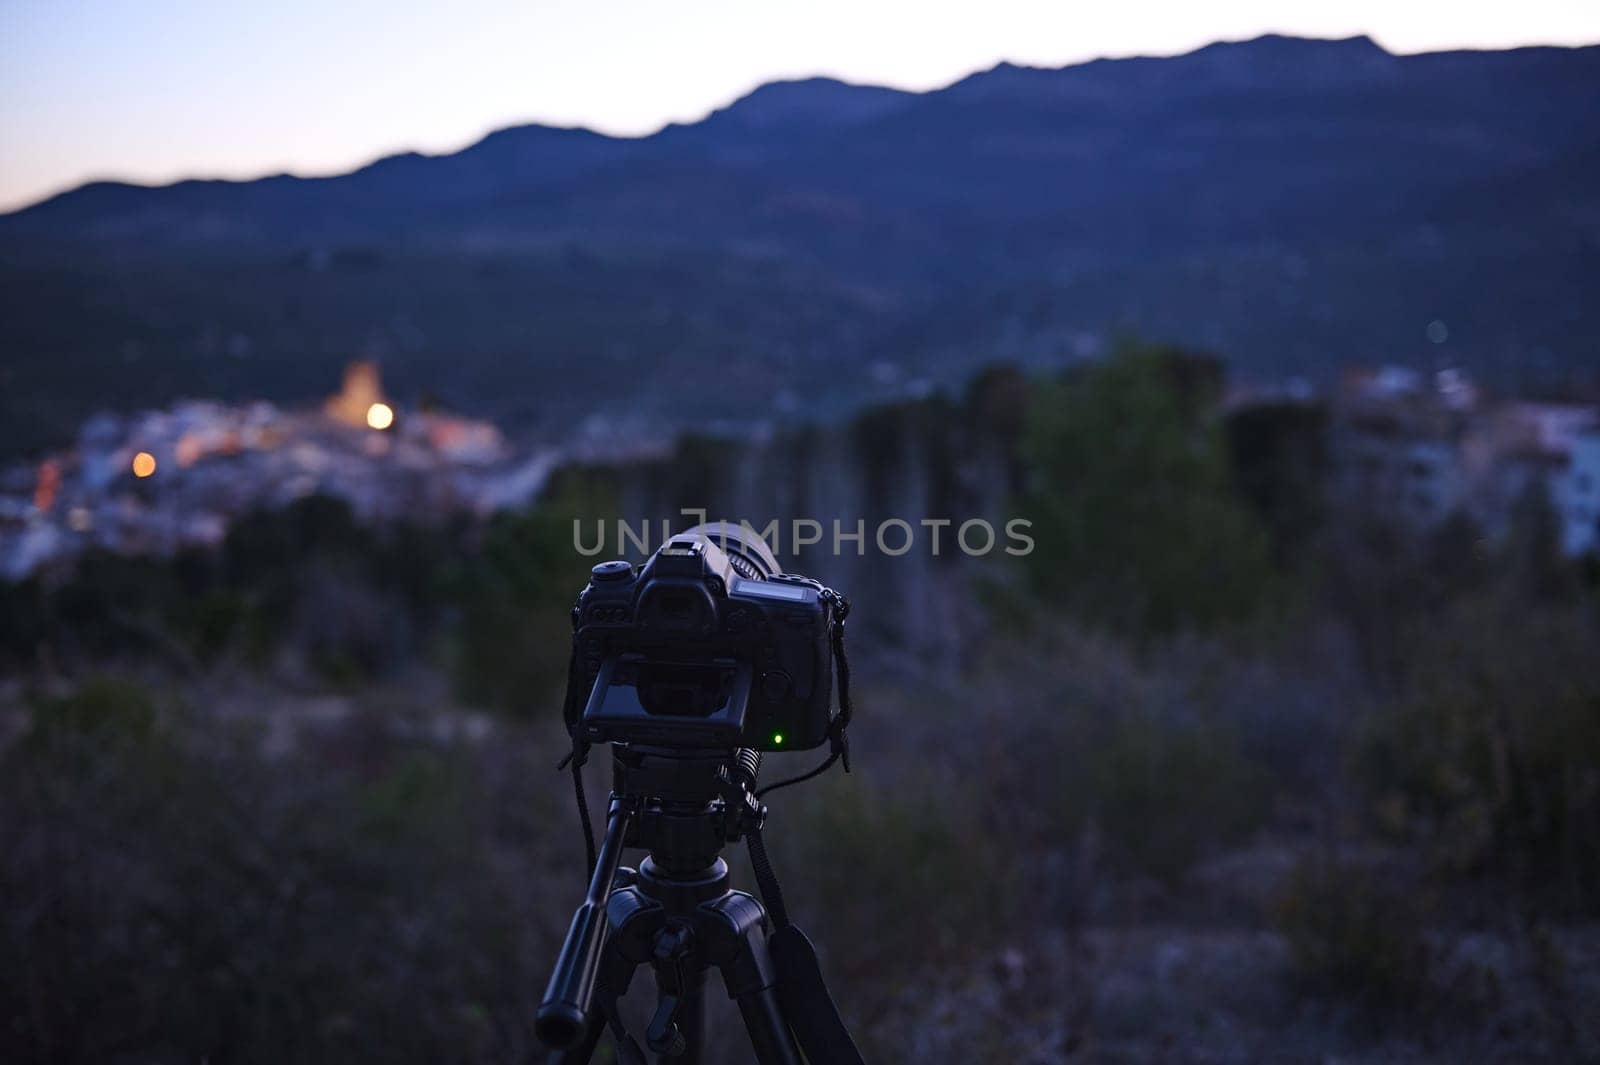 World photography day concept. Horizontal shot of modern digital camera placed on tripod in nature outdoors, ready for capturing steady pictures or video of a village in mountains at dawn